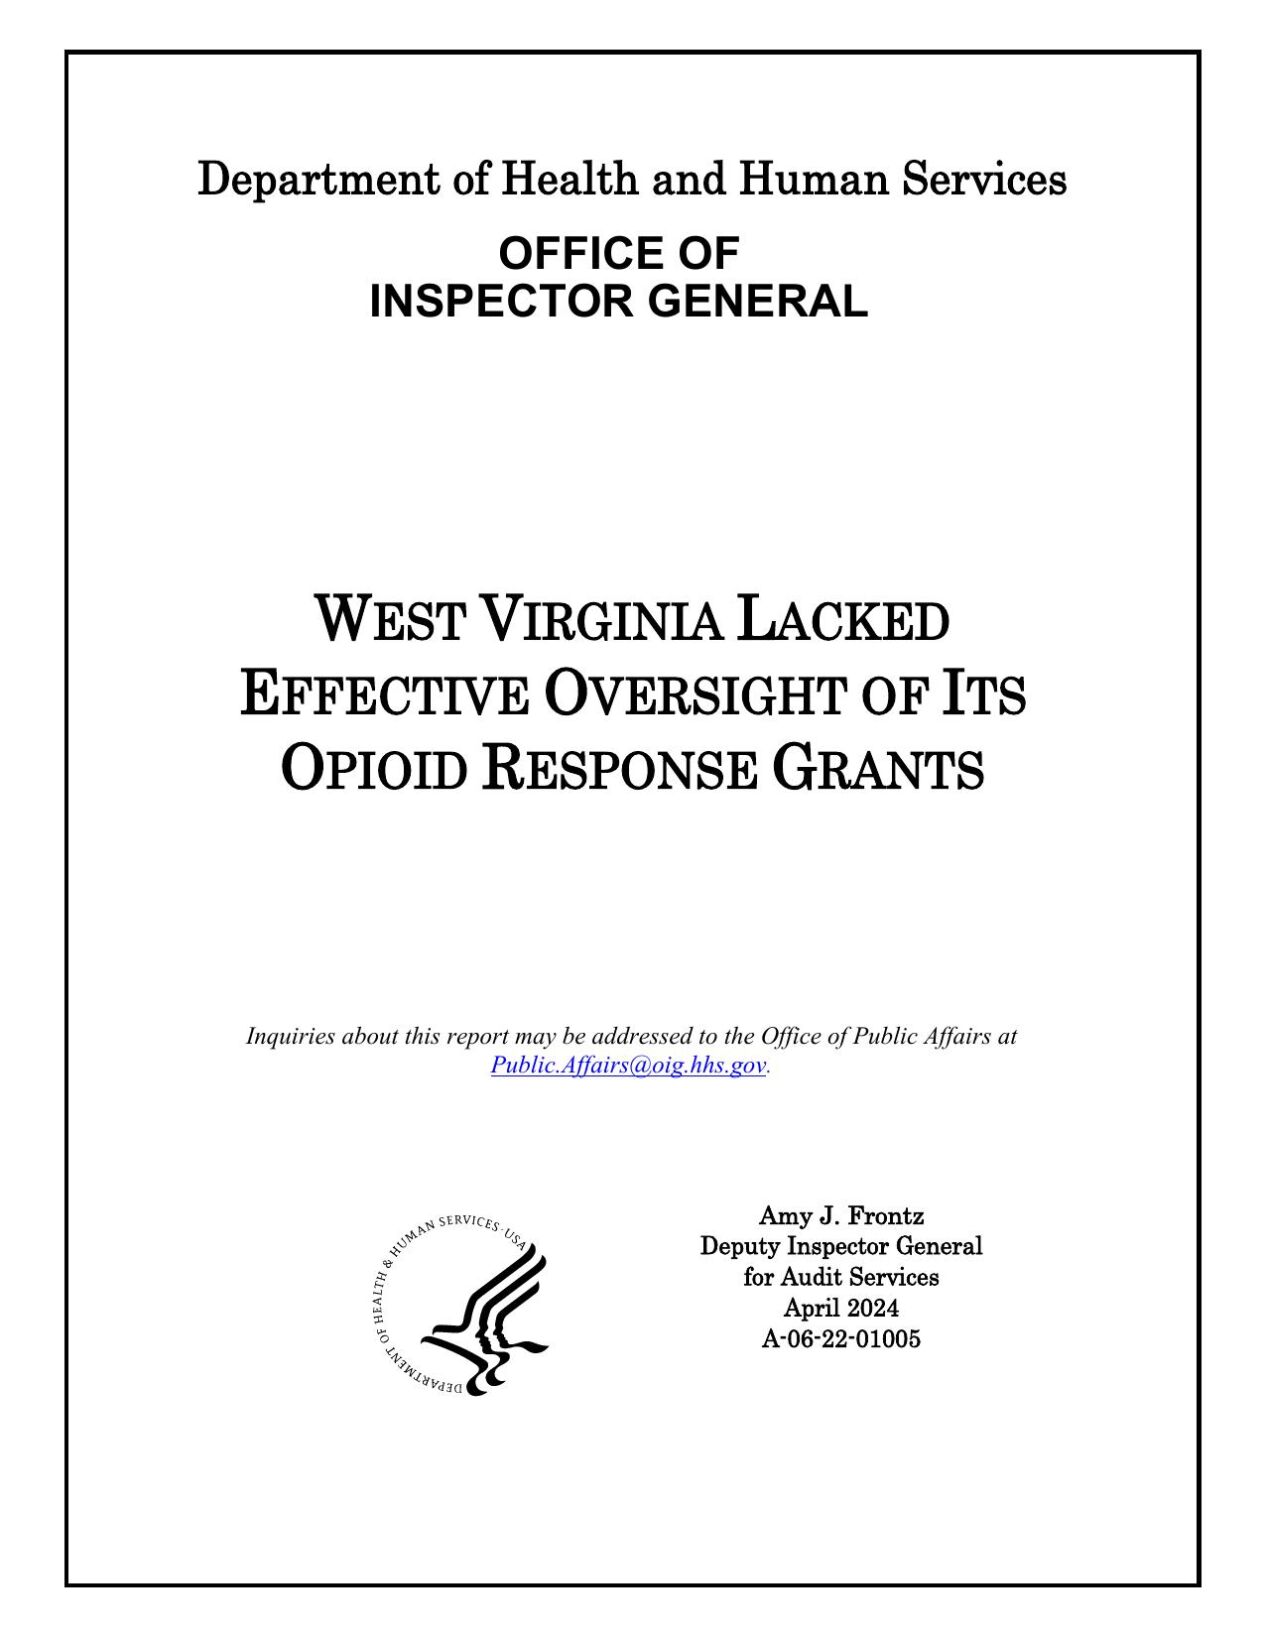 West Virginia Lacked Effective Oversight of its Opioid Response Grants